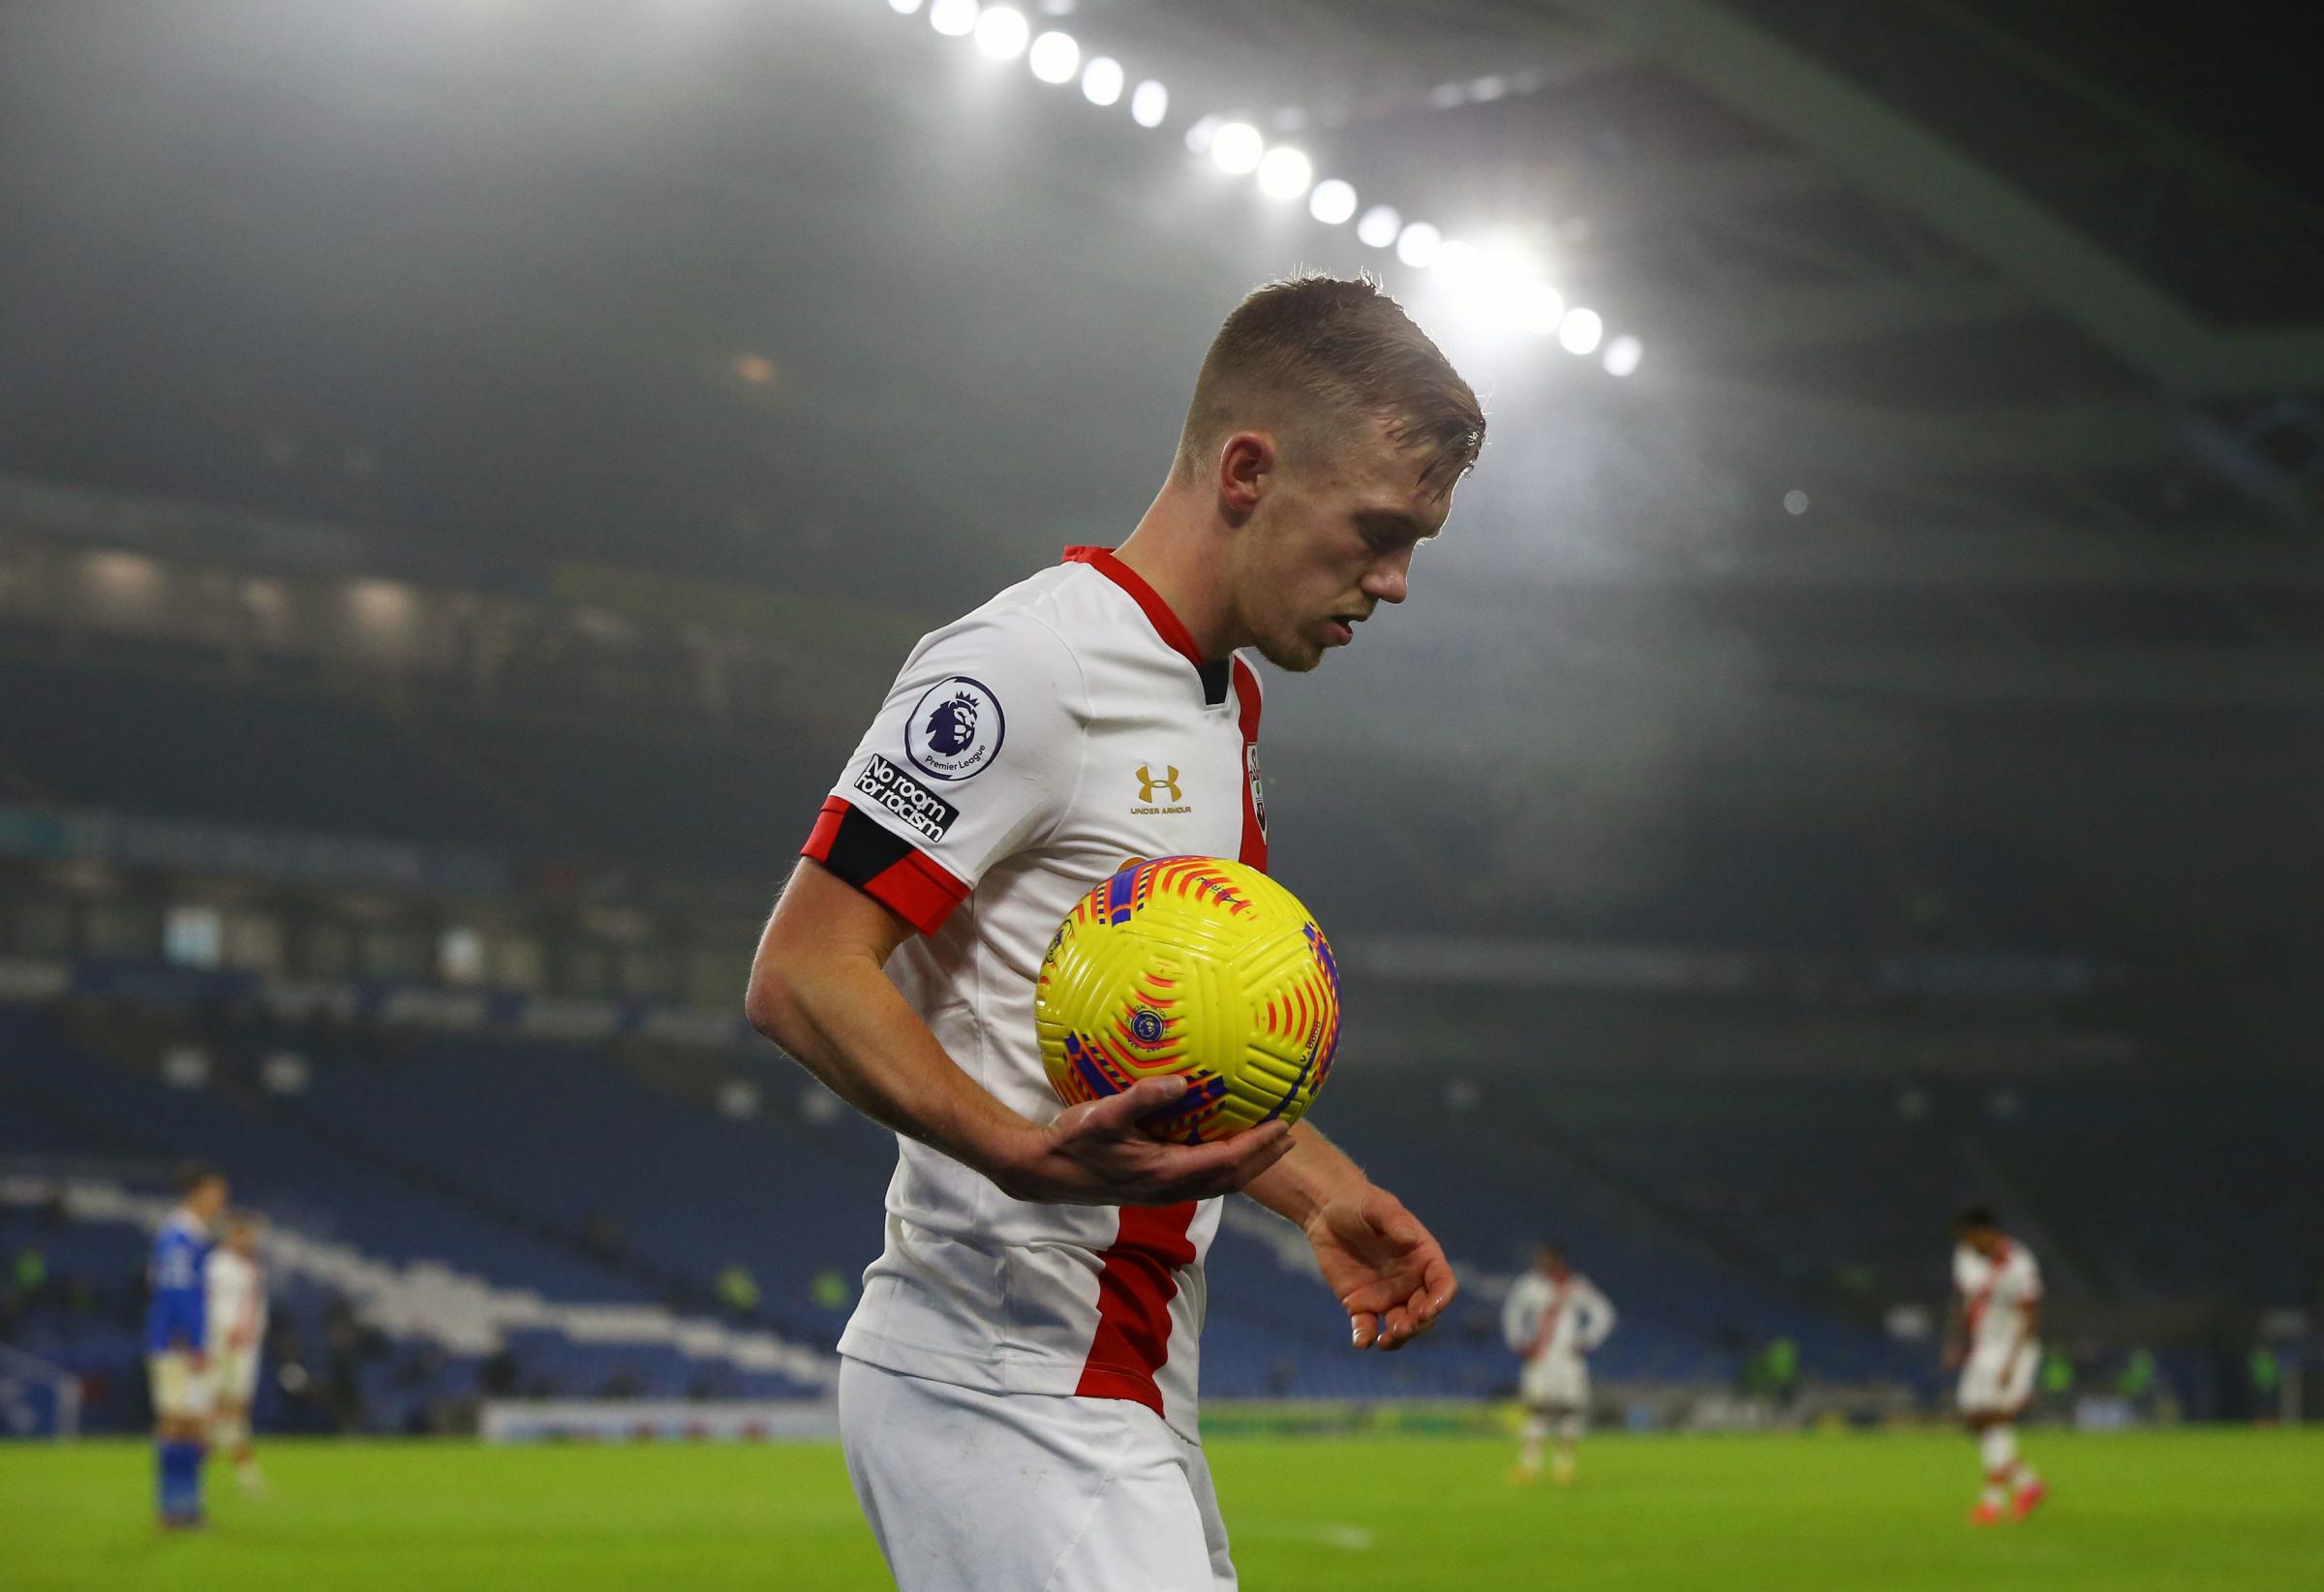 Southampton's James Ward-Prowse back in training with Saints